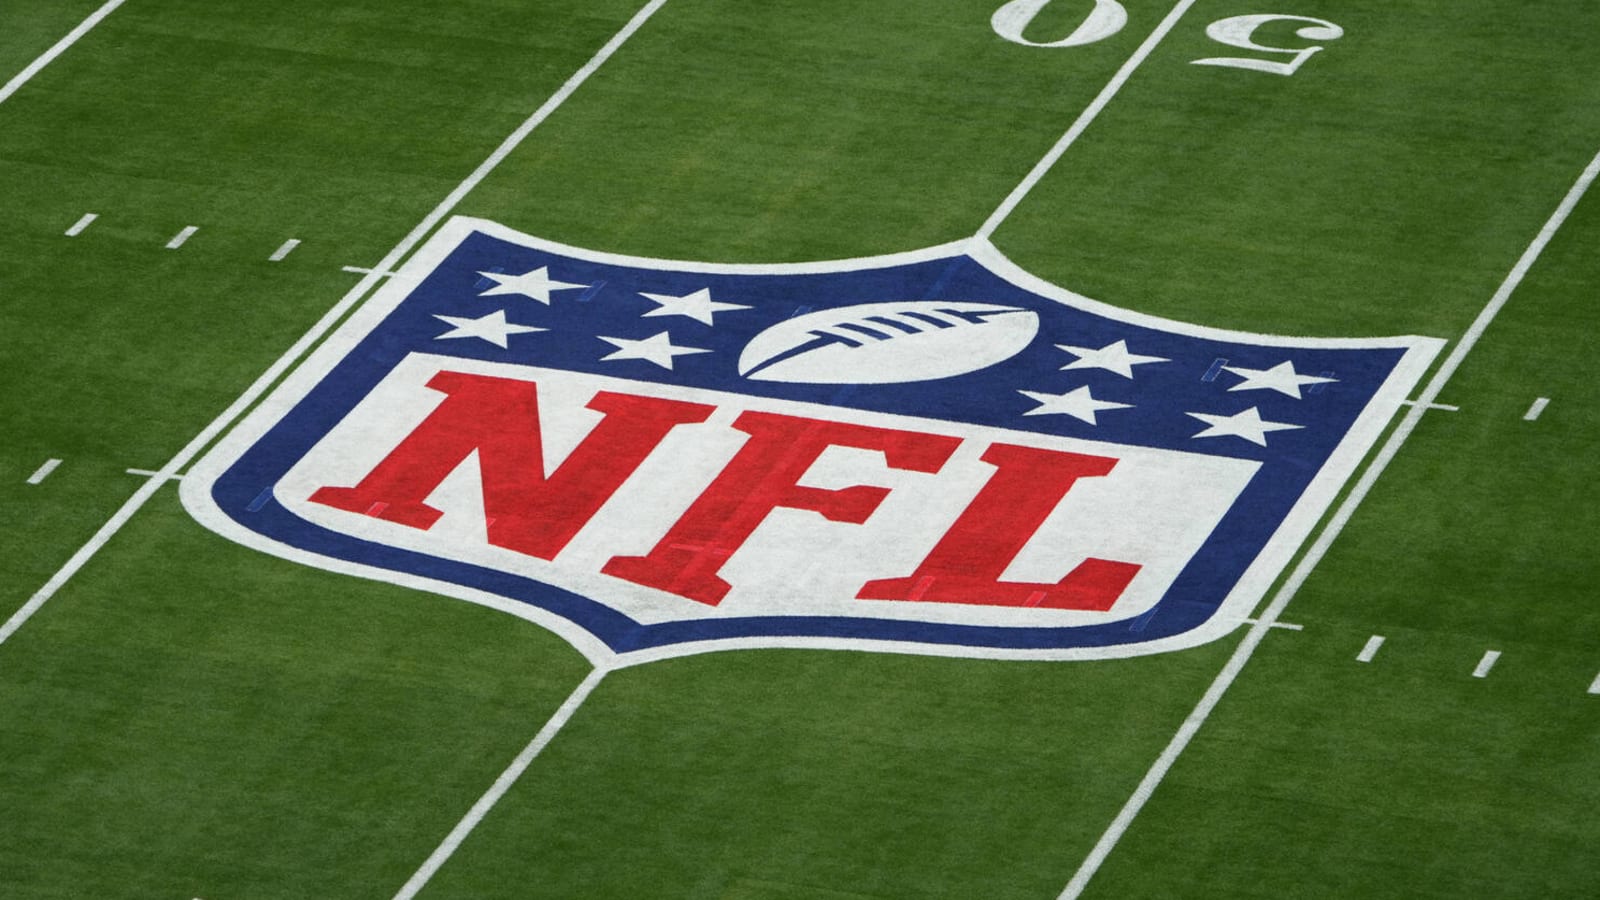 New NFL Sunday Ticket partnership drives up cost for fans